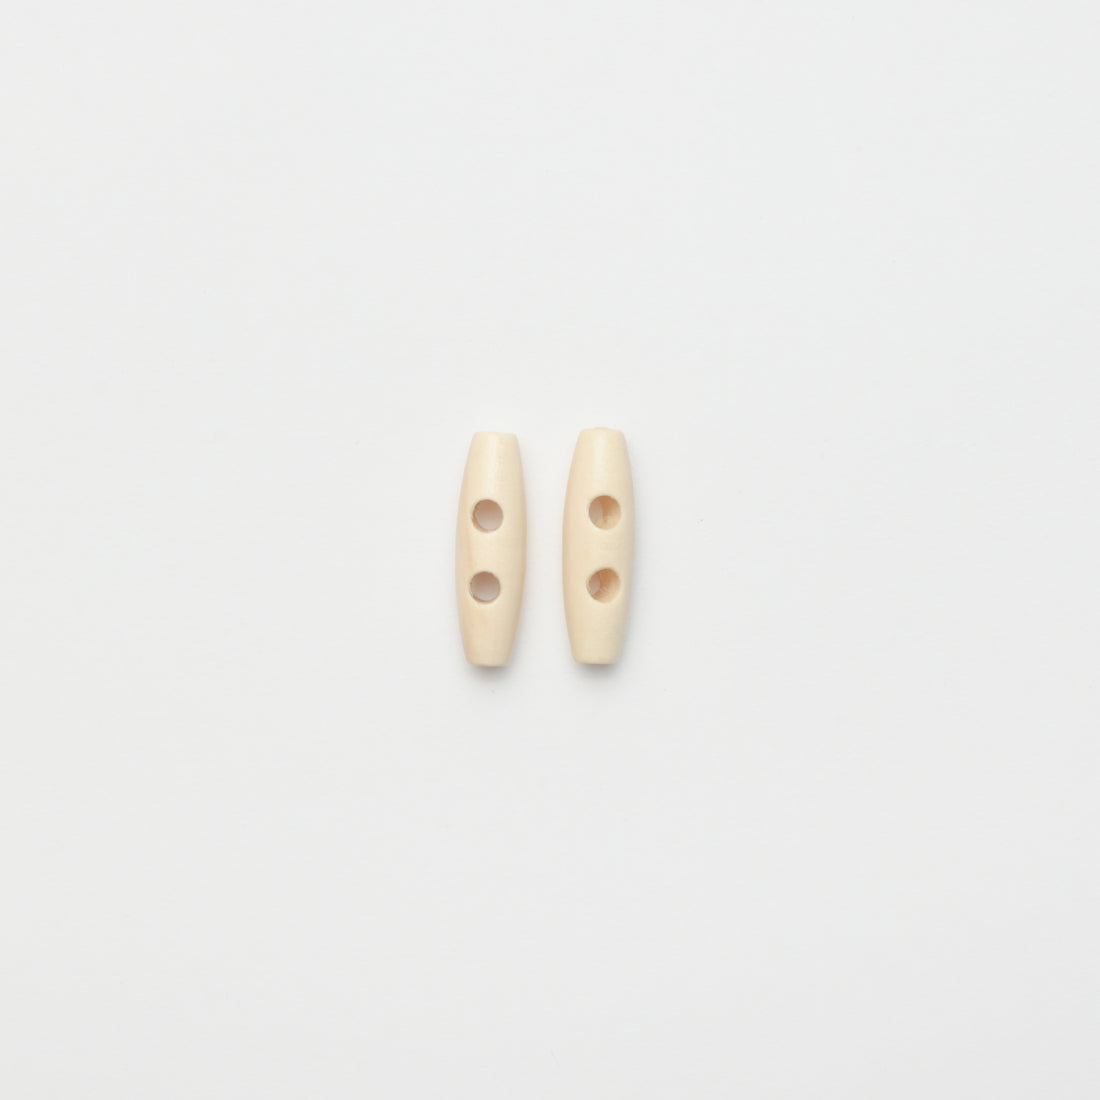 Wooden Toggles - Assorted